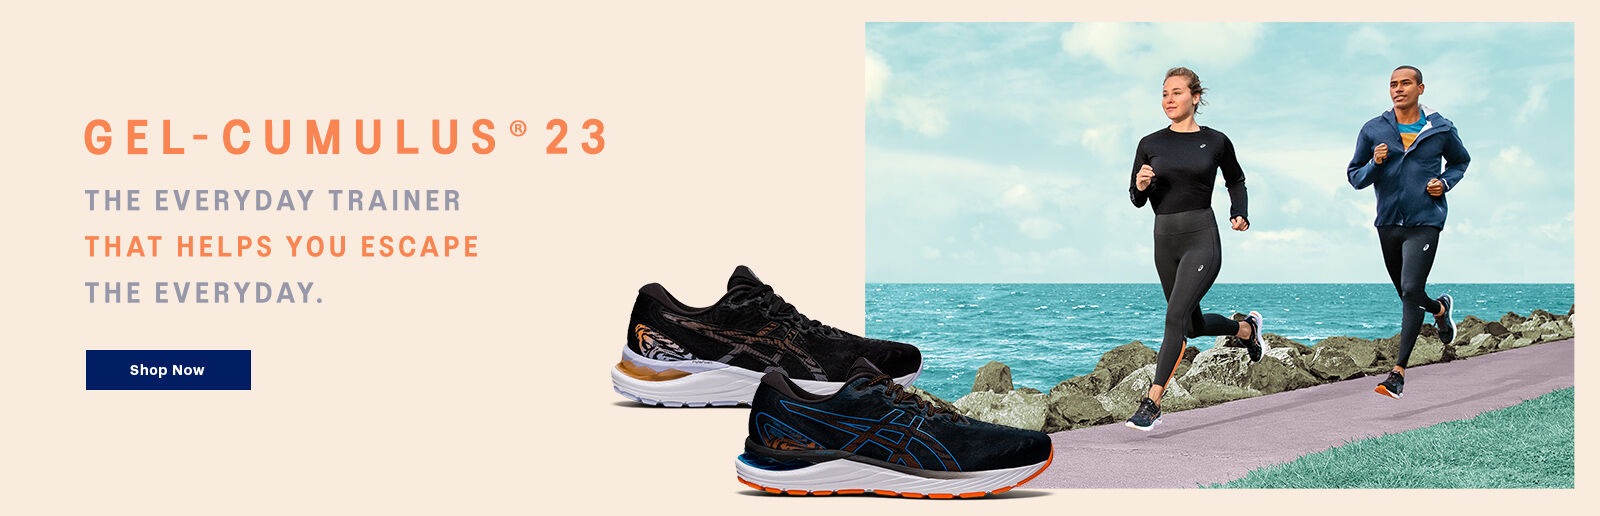 asics outlet online store